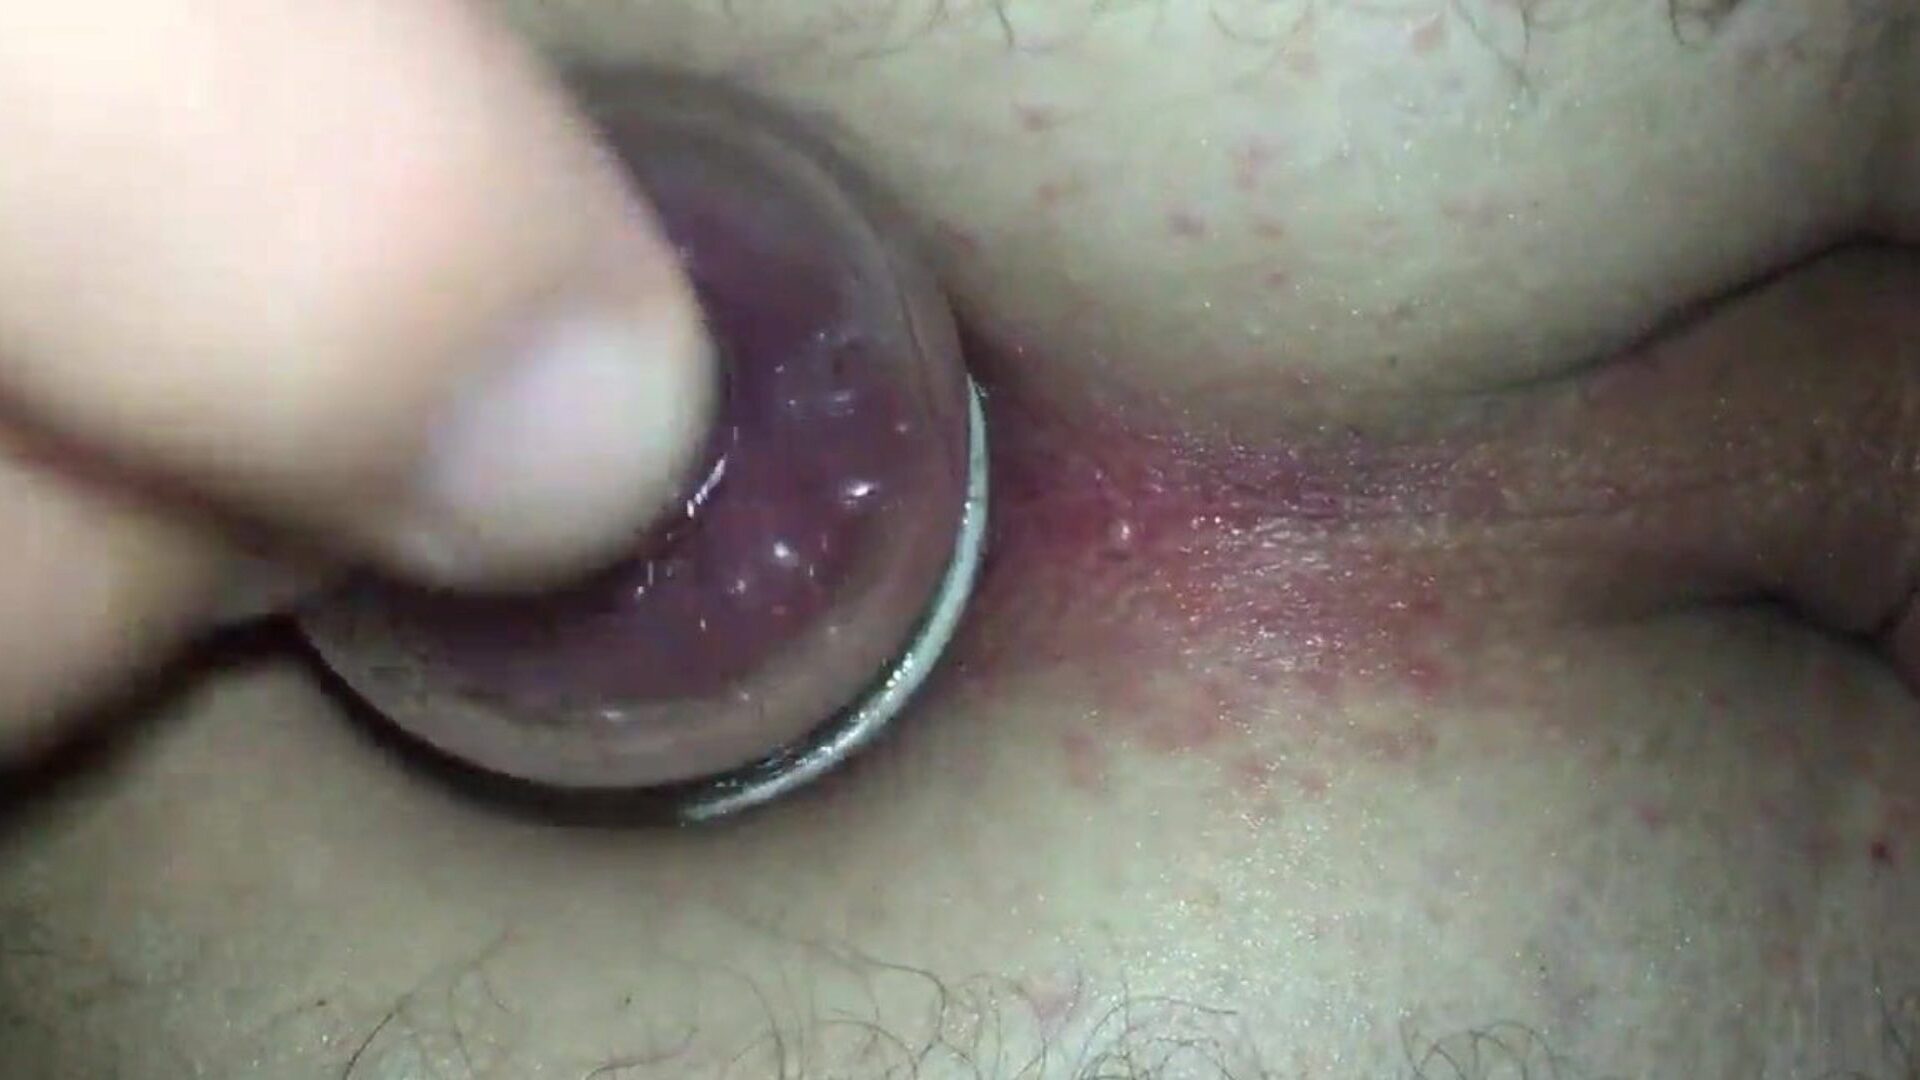 Anus absorption cup and sex toy assfuck poke